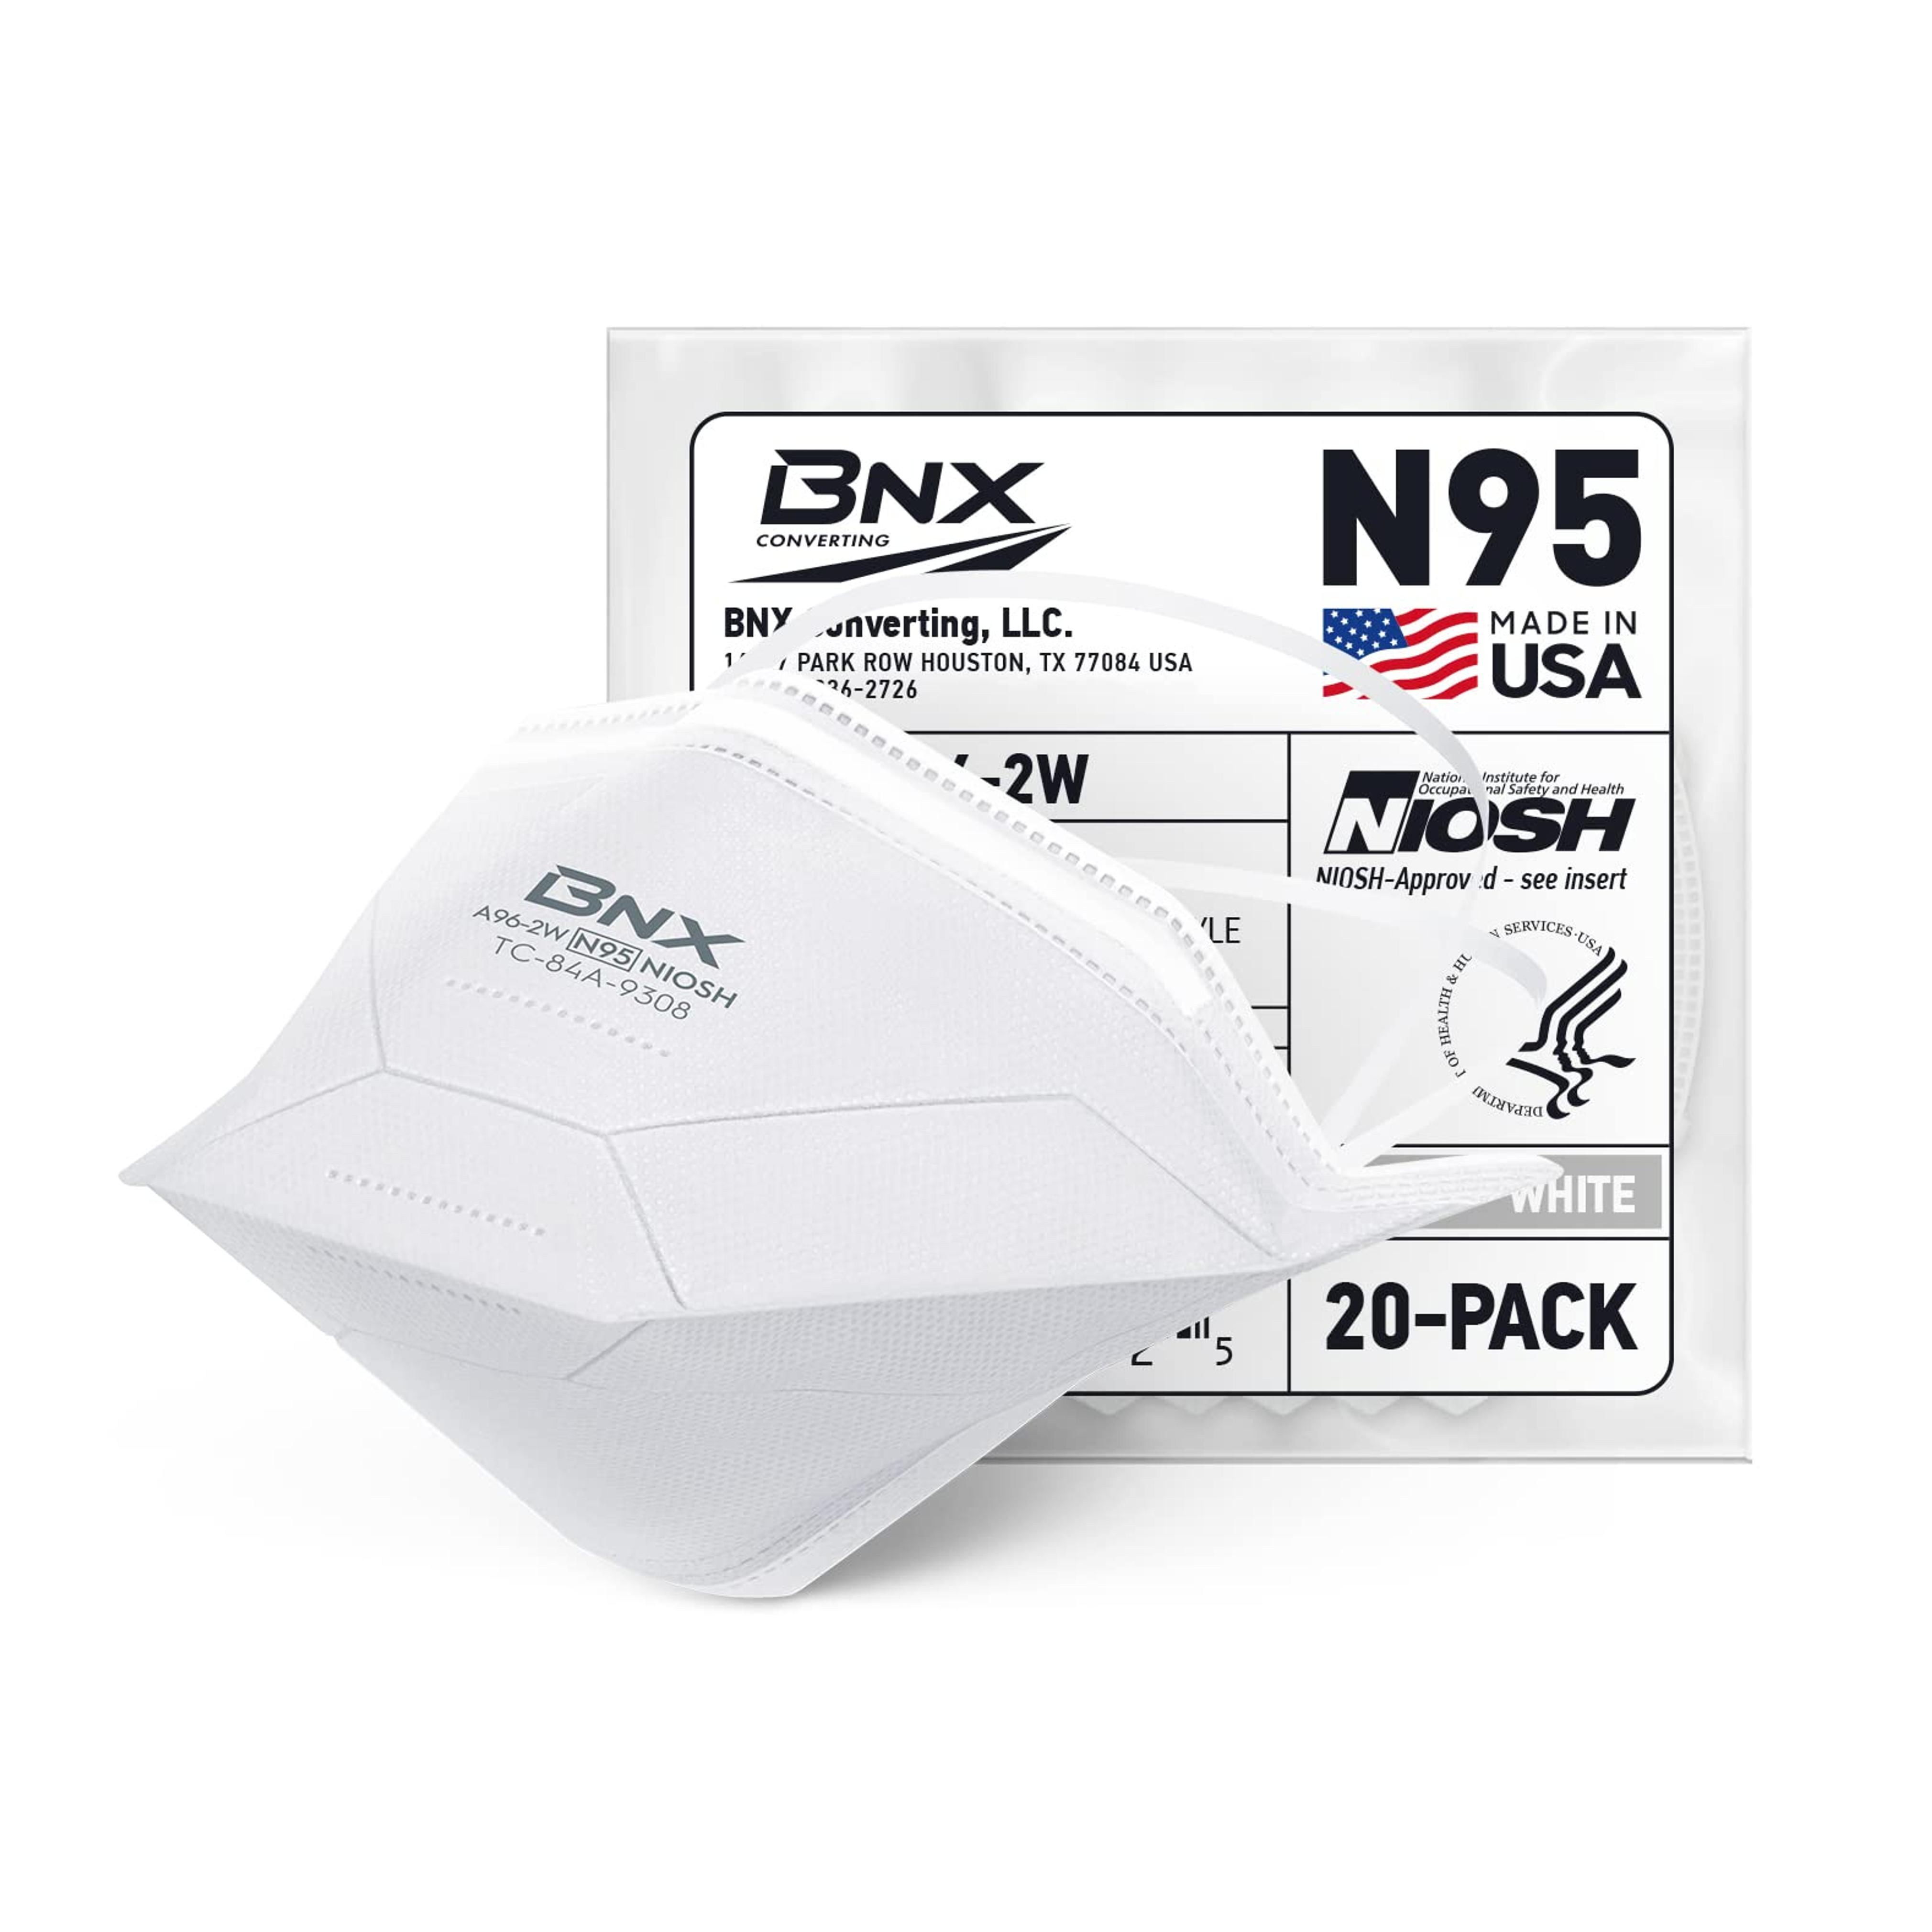 BNX N95 Mask NIOSH Certified MADE IN USA Duckbill Style Particulate Respirator Protective Face Mask (20-Pack, Approval Number TC-84A-9308 / Model A96-2) White